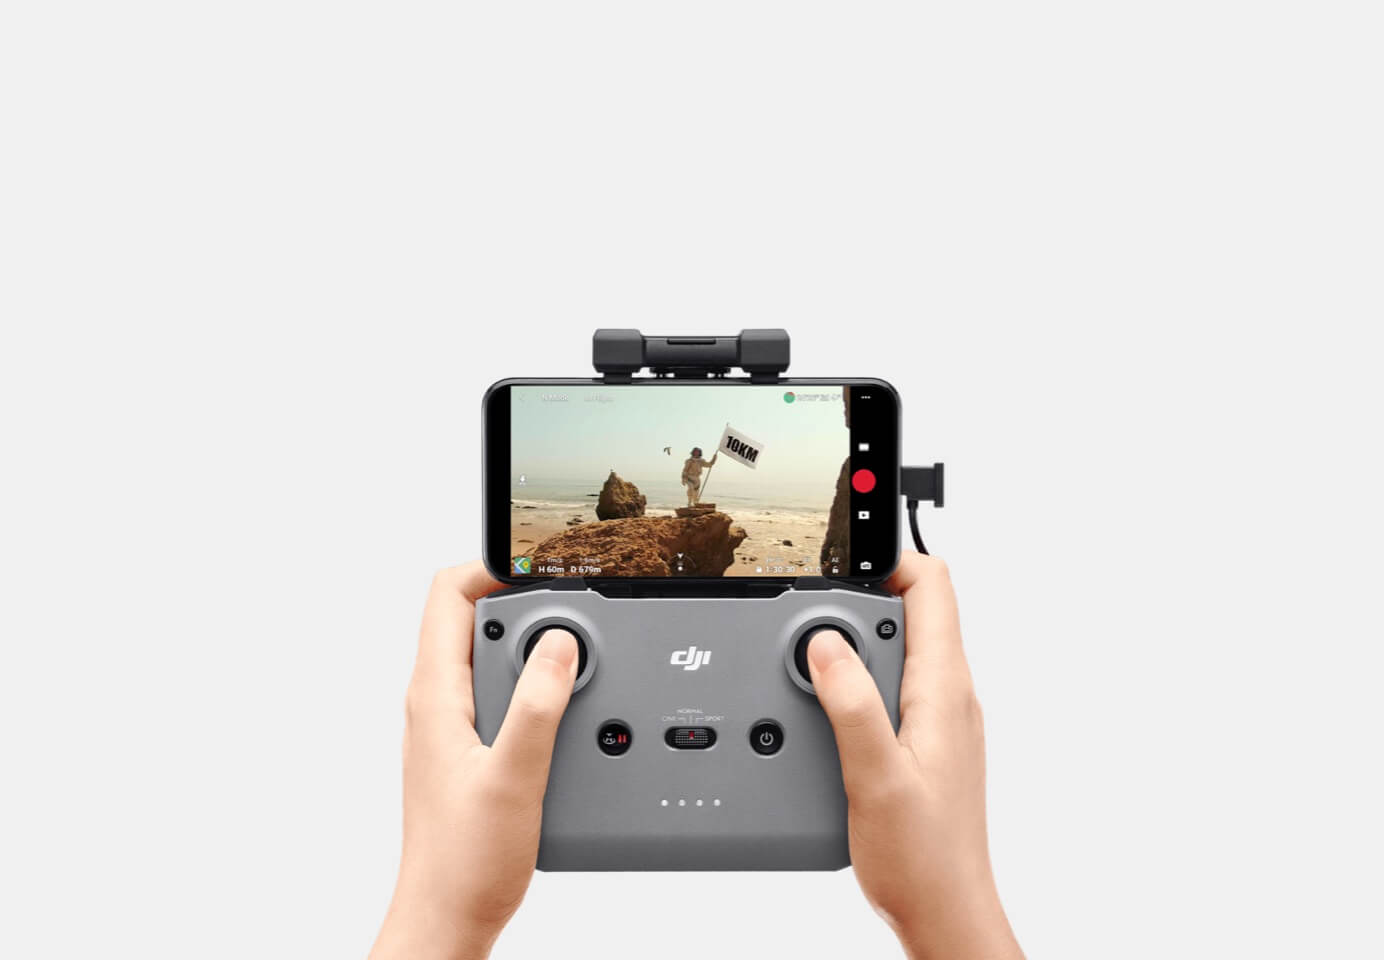 DJI Mini 2 – 3-Axis Gimbal with 4K HD Camera, mini 2 supports up to 10km of hd video transmission and has excellent anti-inter